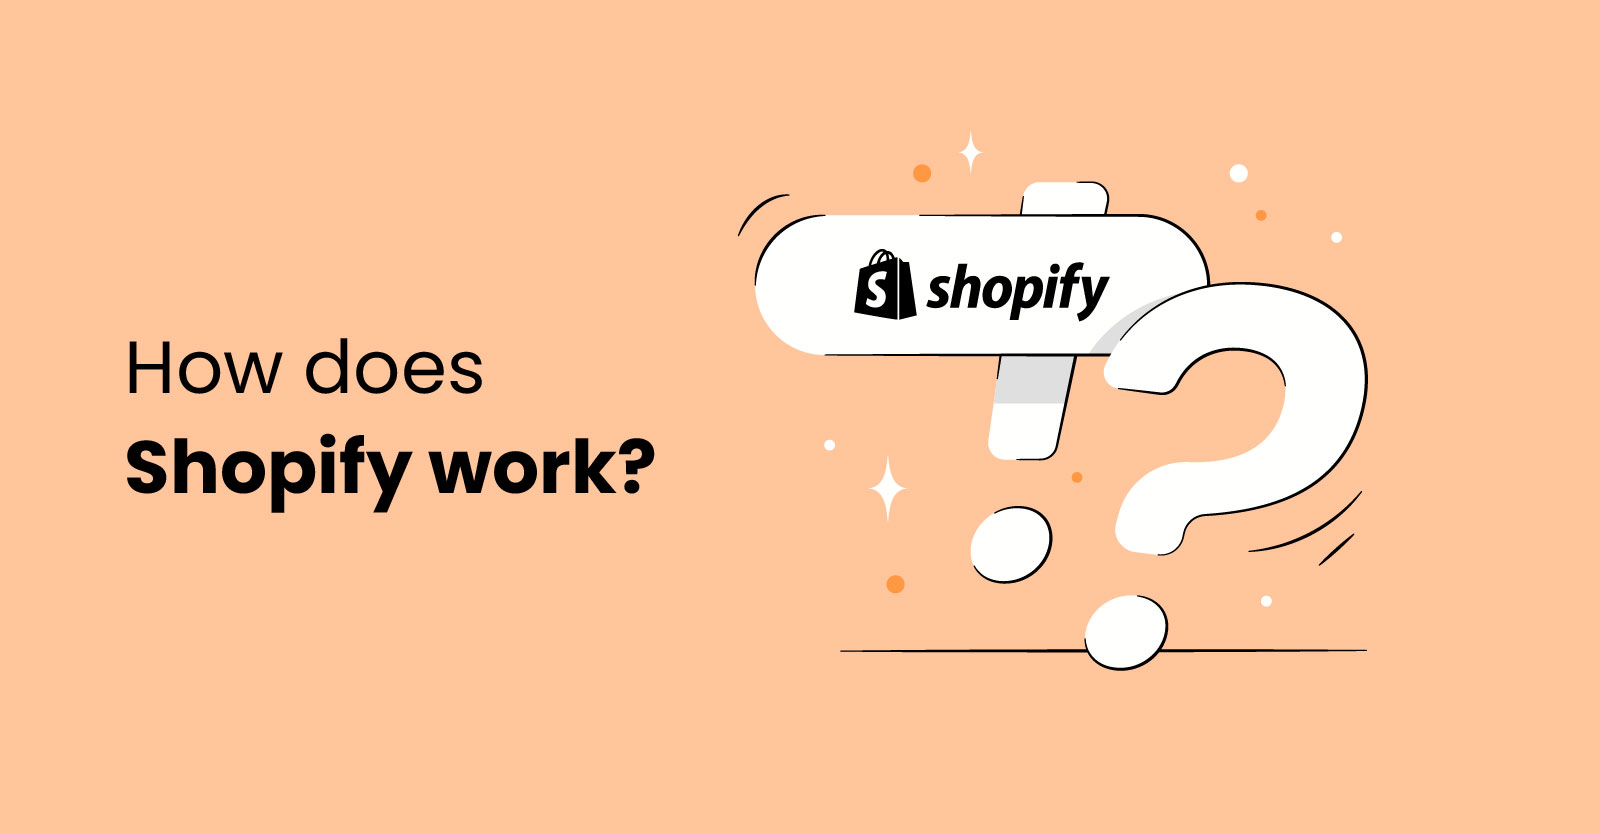 What Is Shopify and How Does it Work?